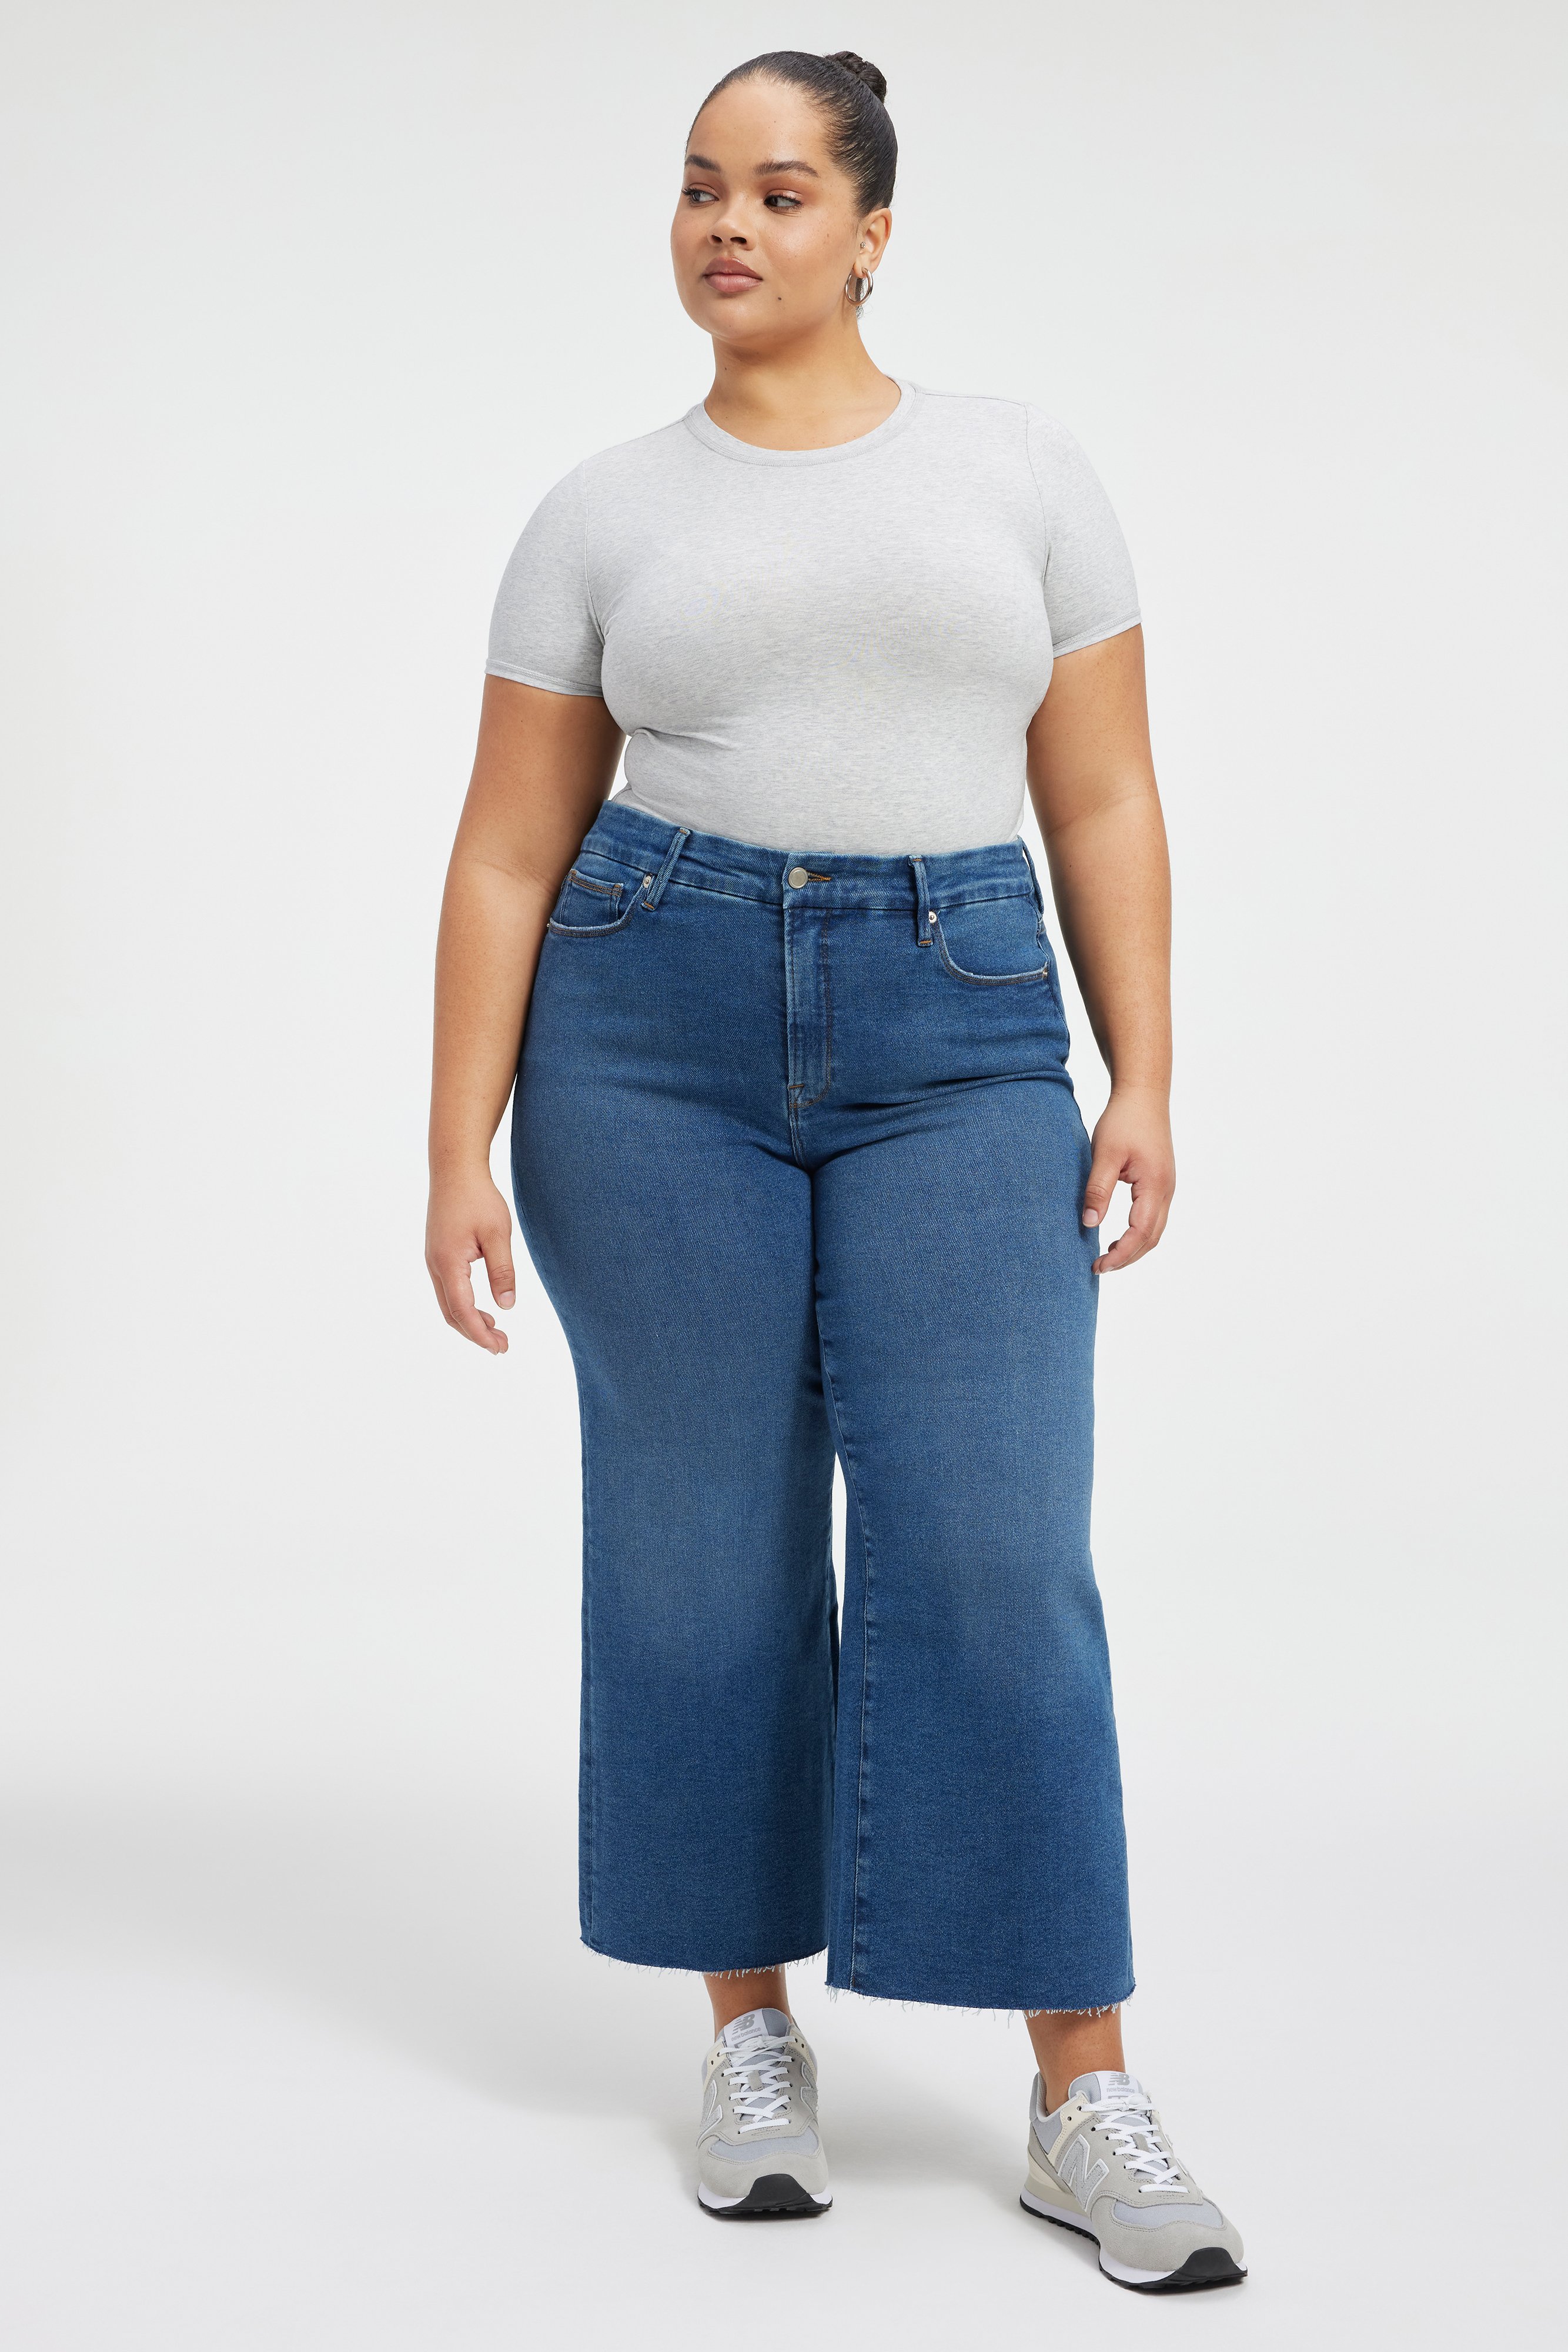 Styled with GOOD WAIST PALAZZO CROPPED JEANS | INDIGO424